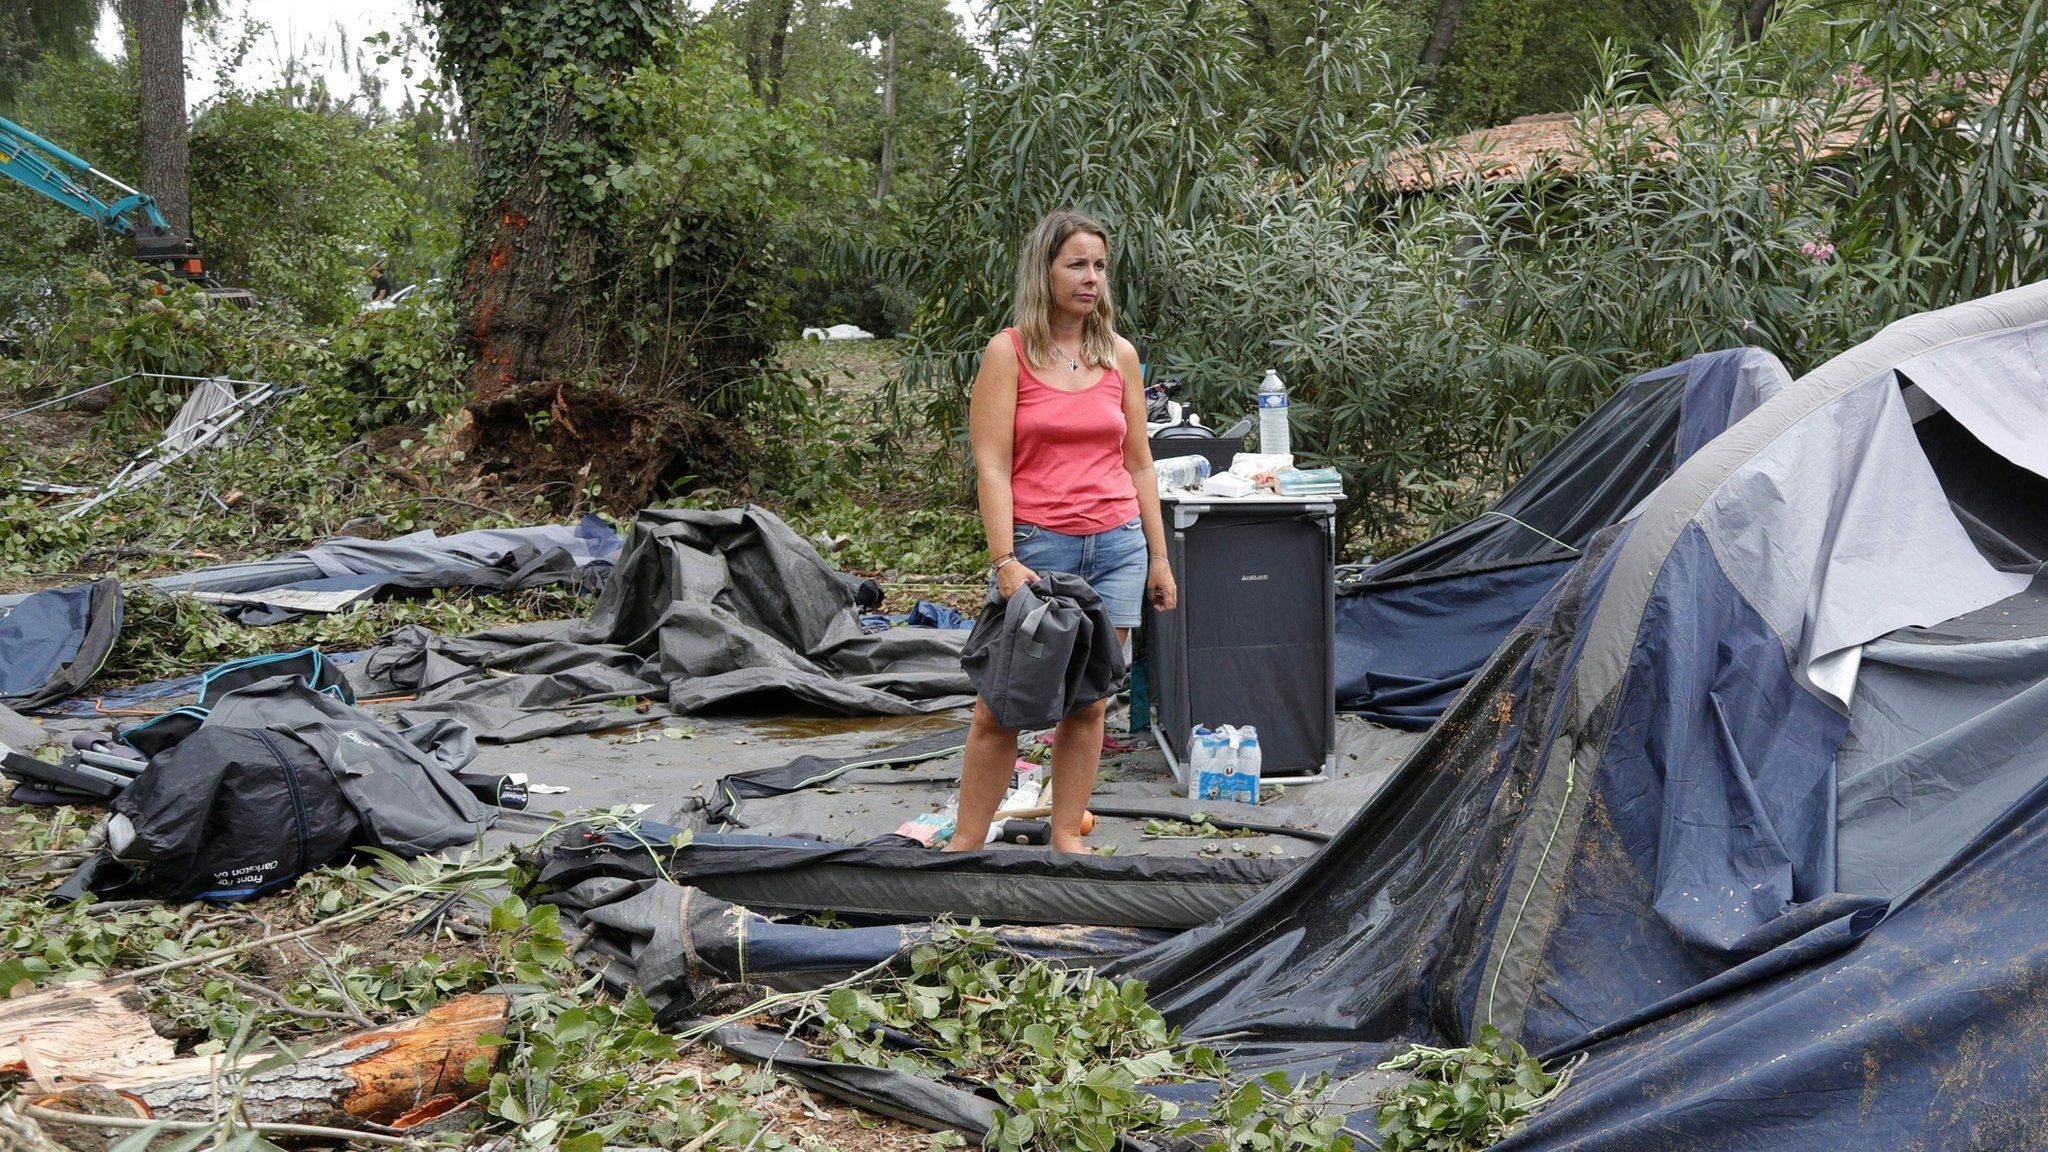 A woman stands in the wreckage of a tent